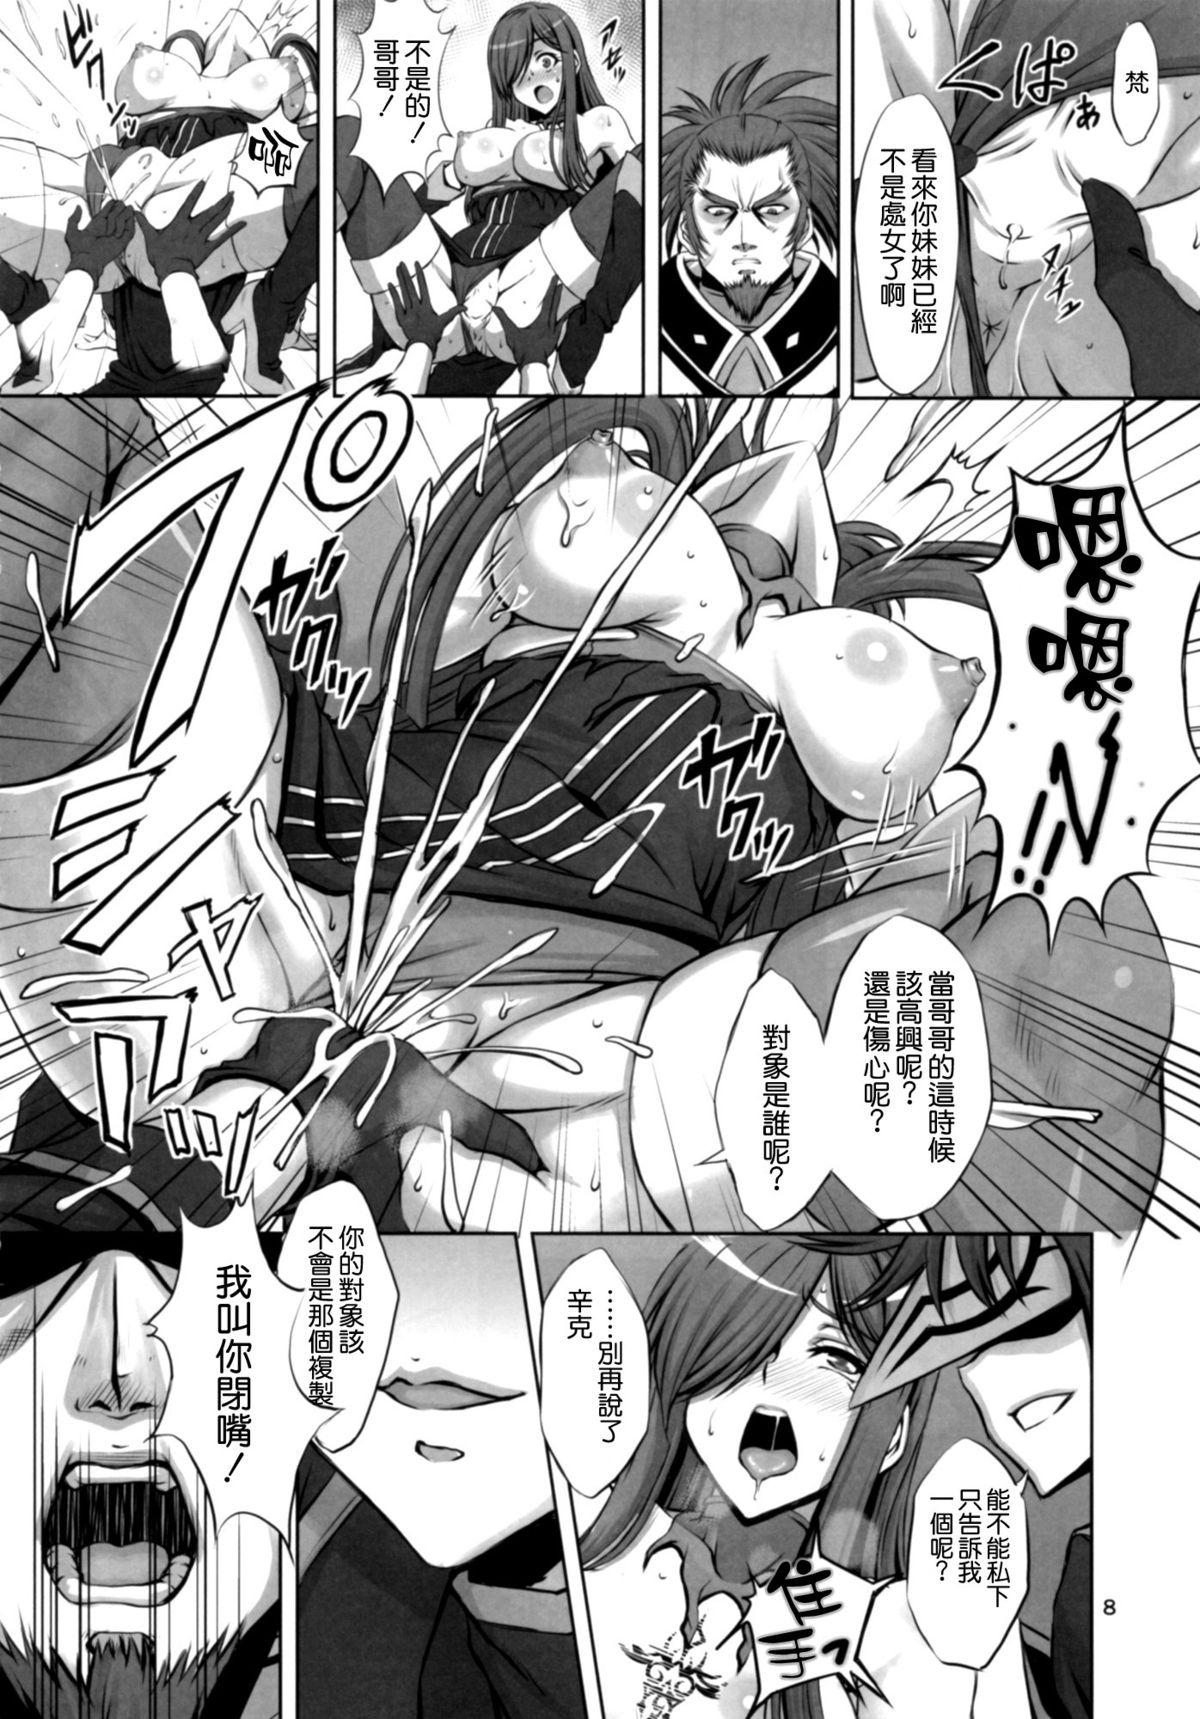 Action Shin ◎ - Tales of the abyss Teenage Girl Porn - Page 8